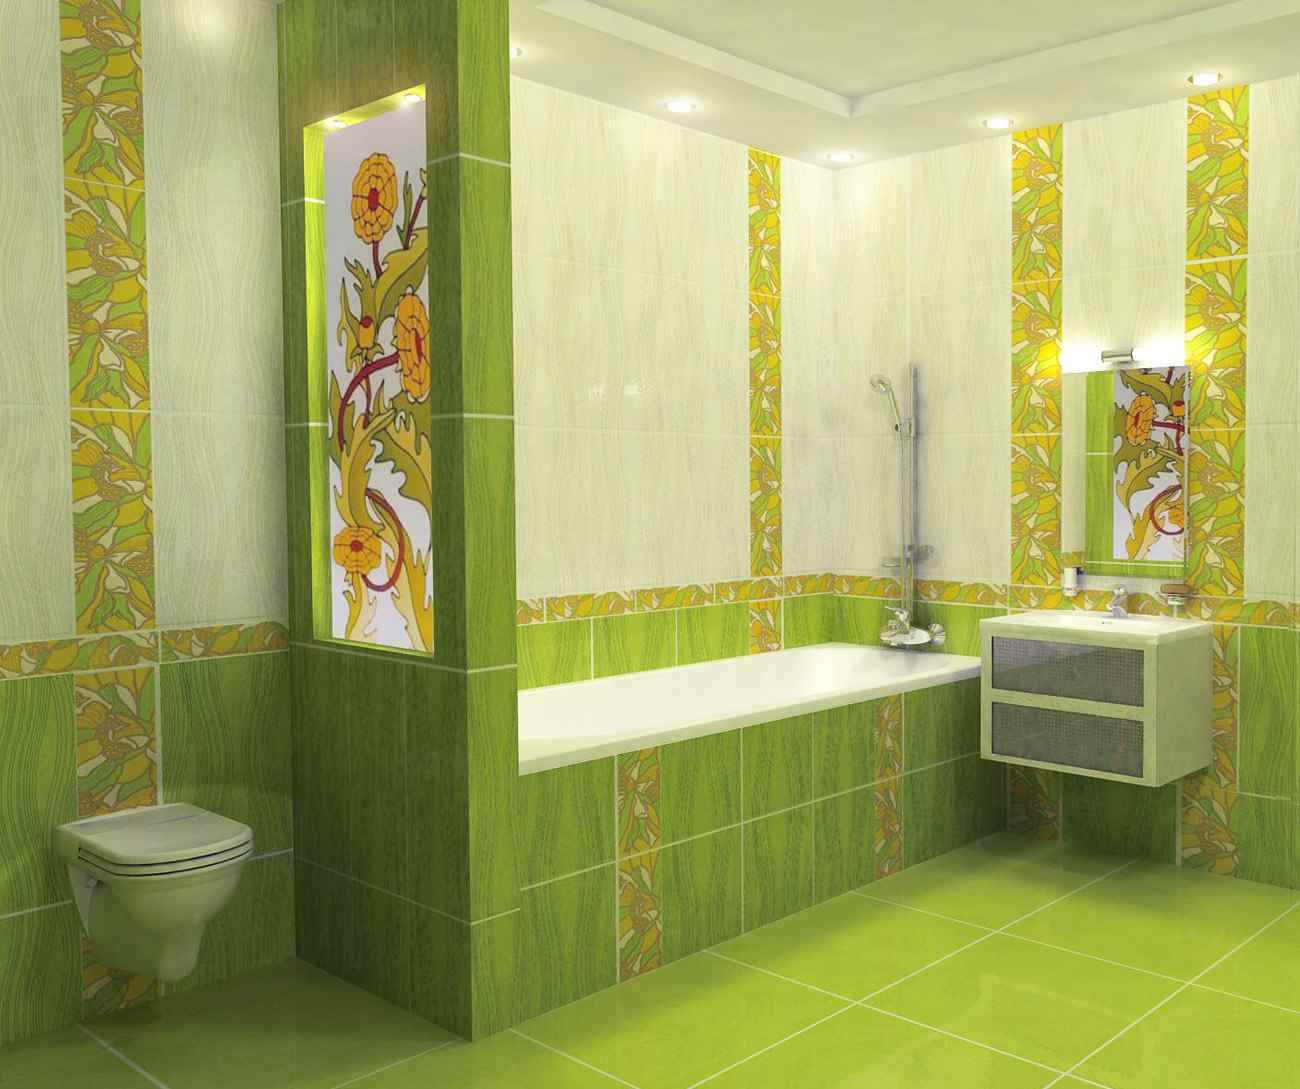 the idea of ​​a beautiful design laying tiles in the bathroom